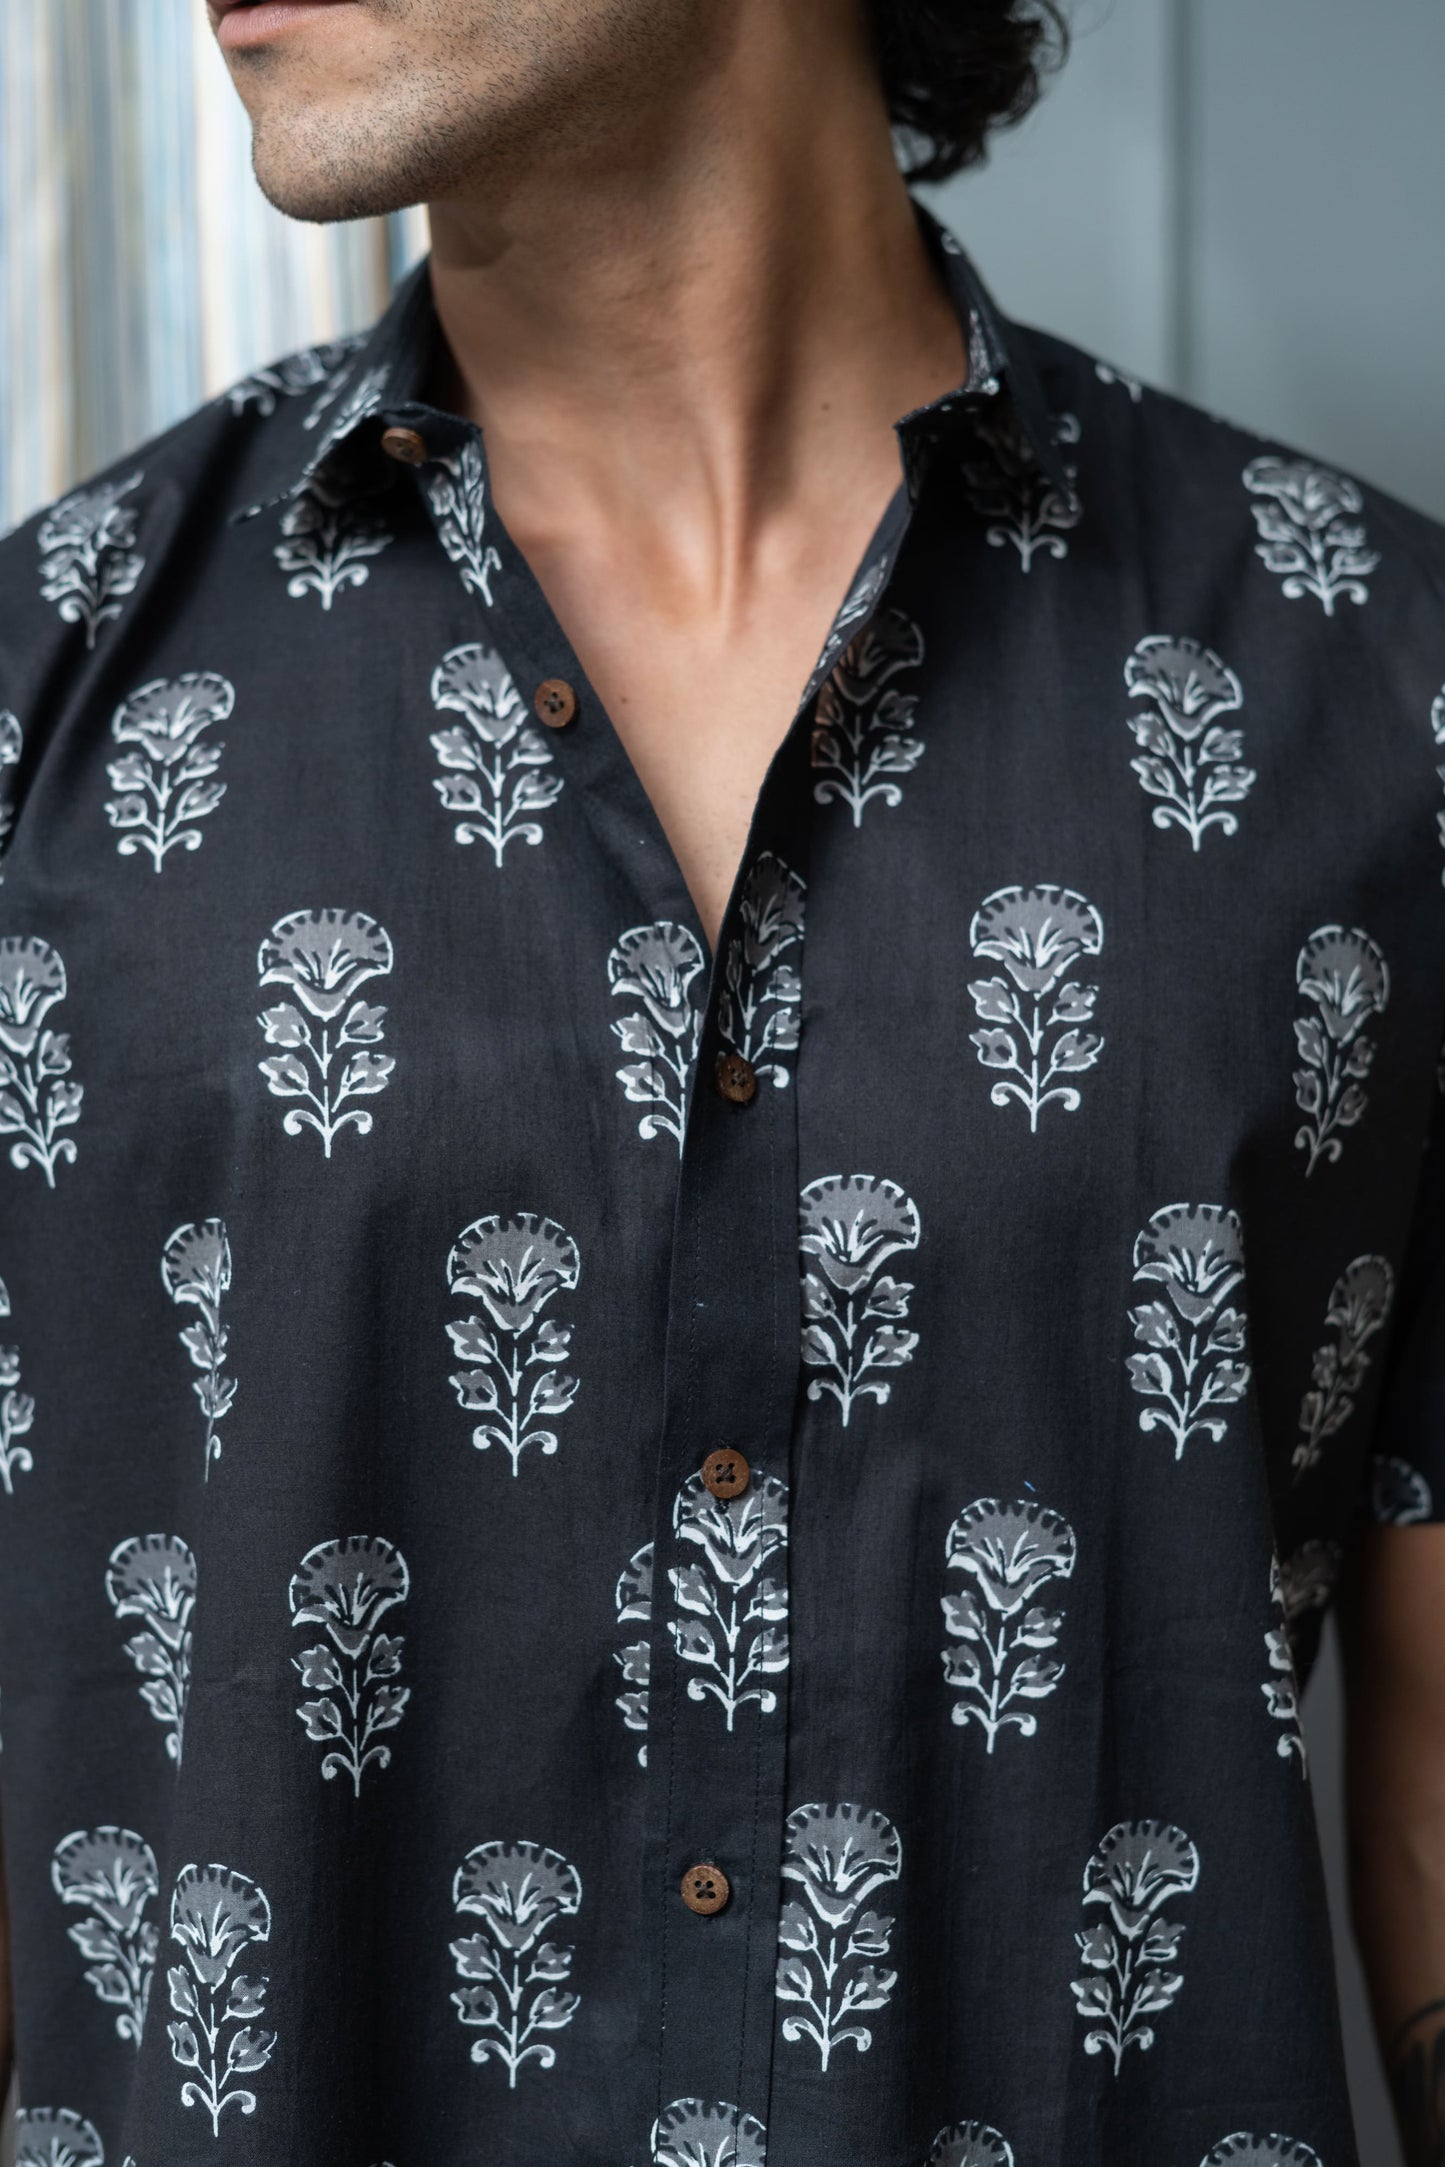 The Black Half Sleeves Shirt With White Flower Print